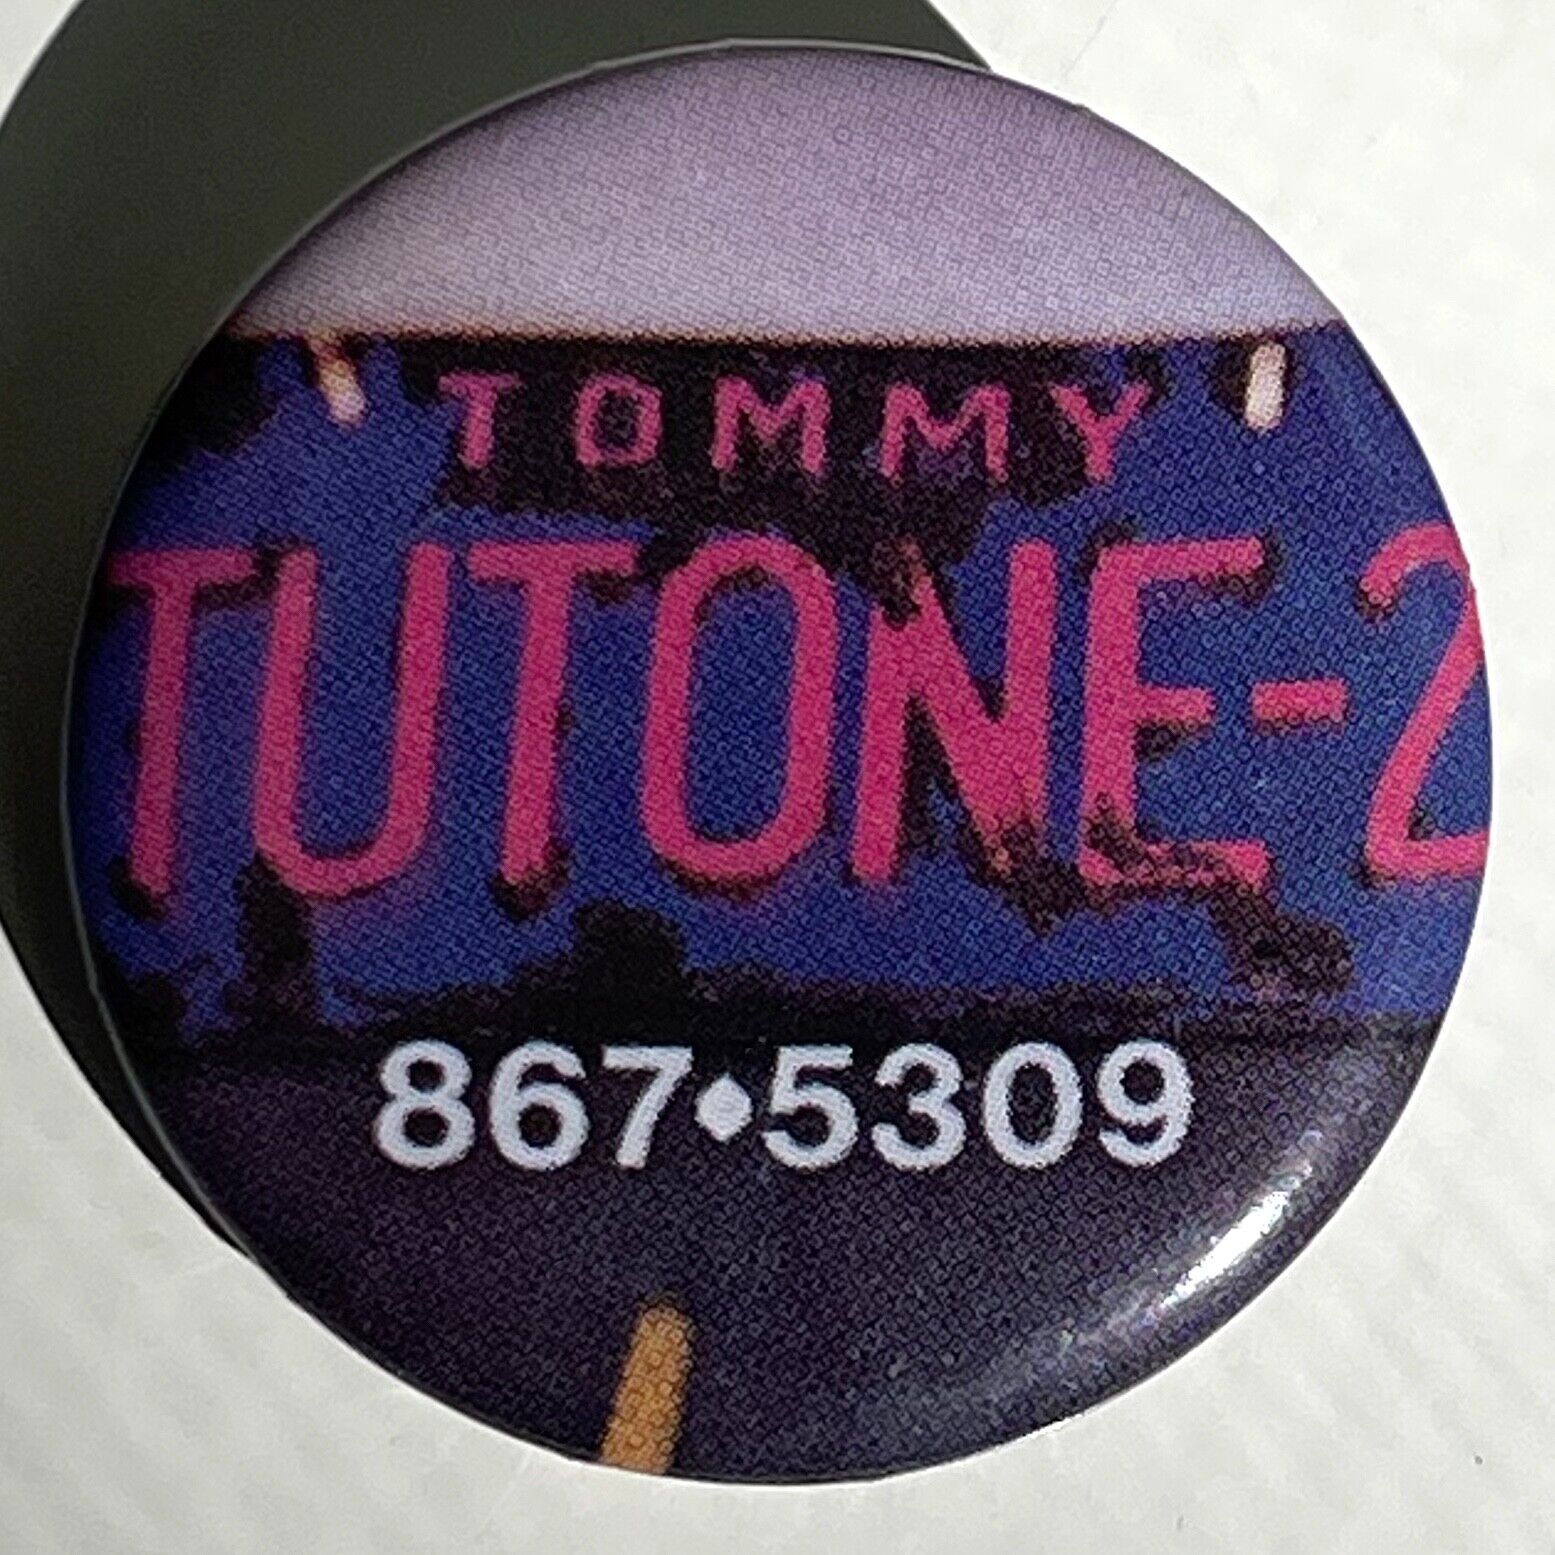 RARE Vintage 1980 TOMMY TUTONE button 867-5309 Jenny pin badge 80s band 1.25\